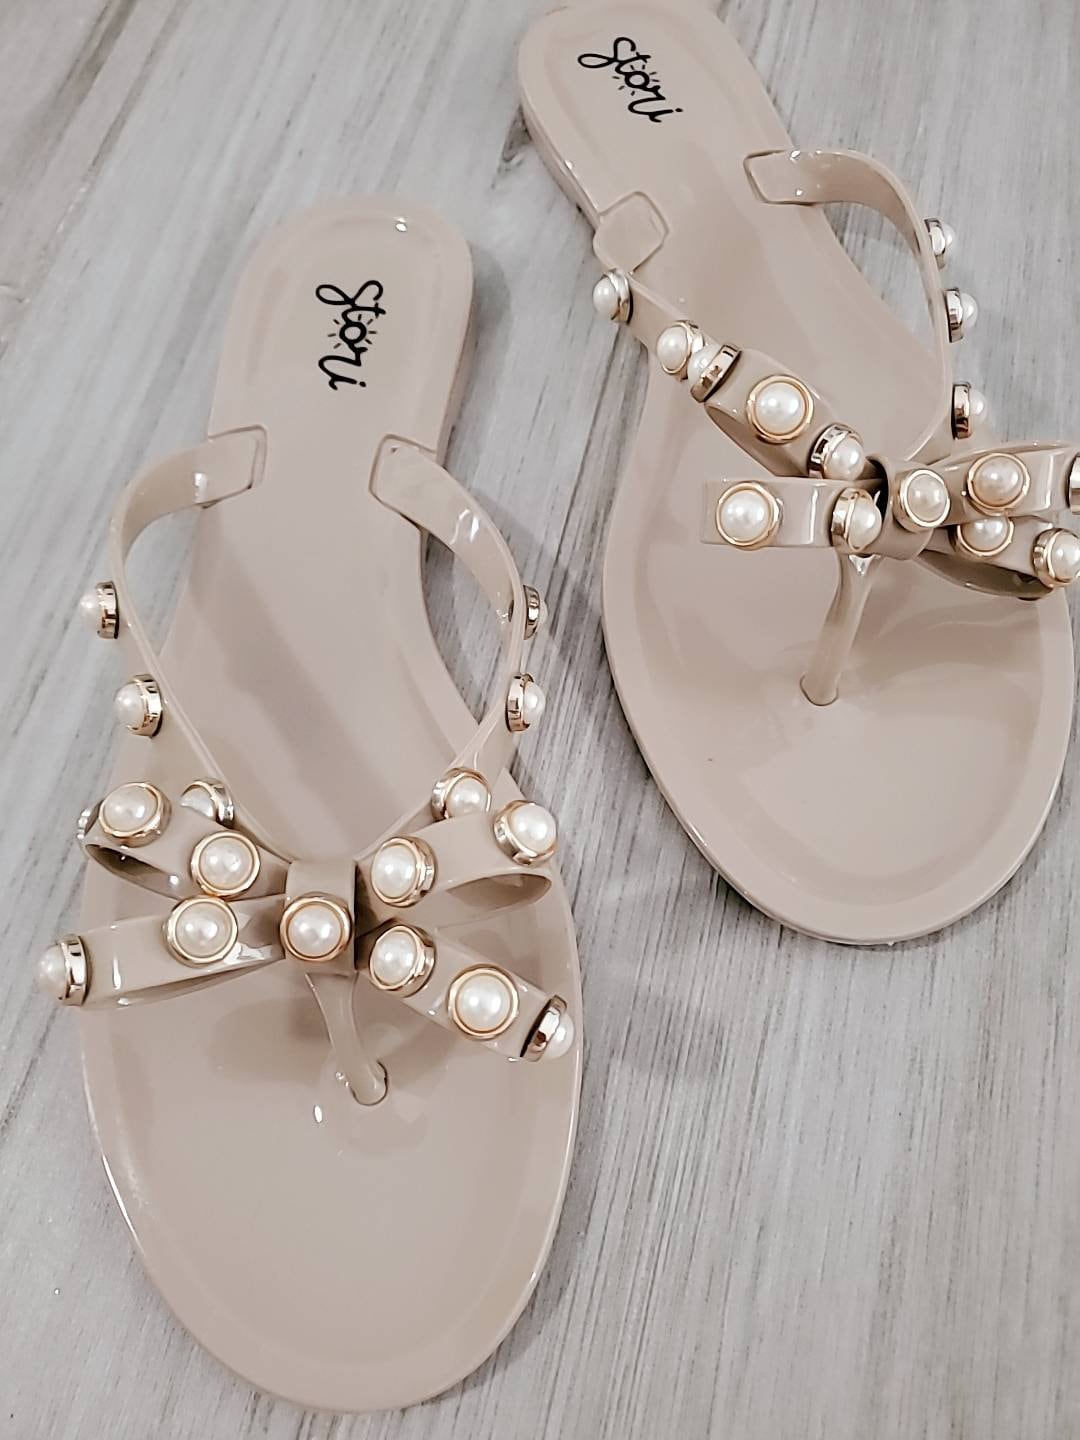 Pearl Jelly Sandals Studded Women's Thongs Bow Etsy